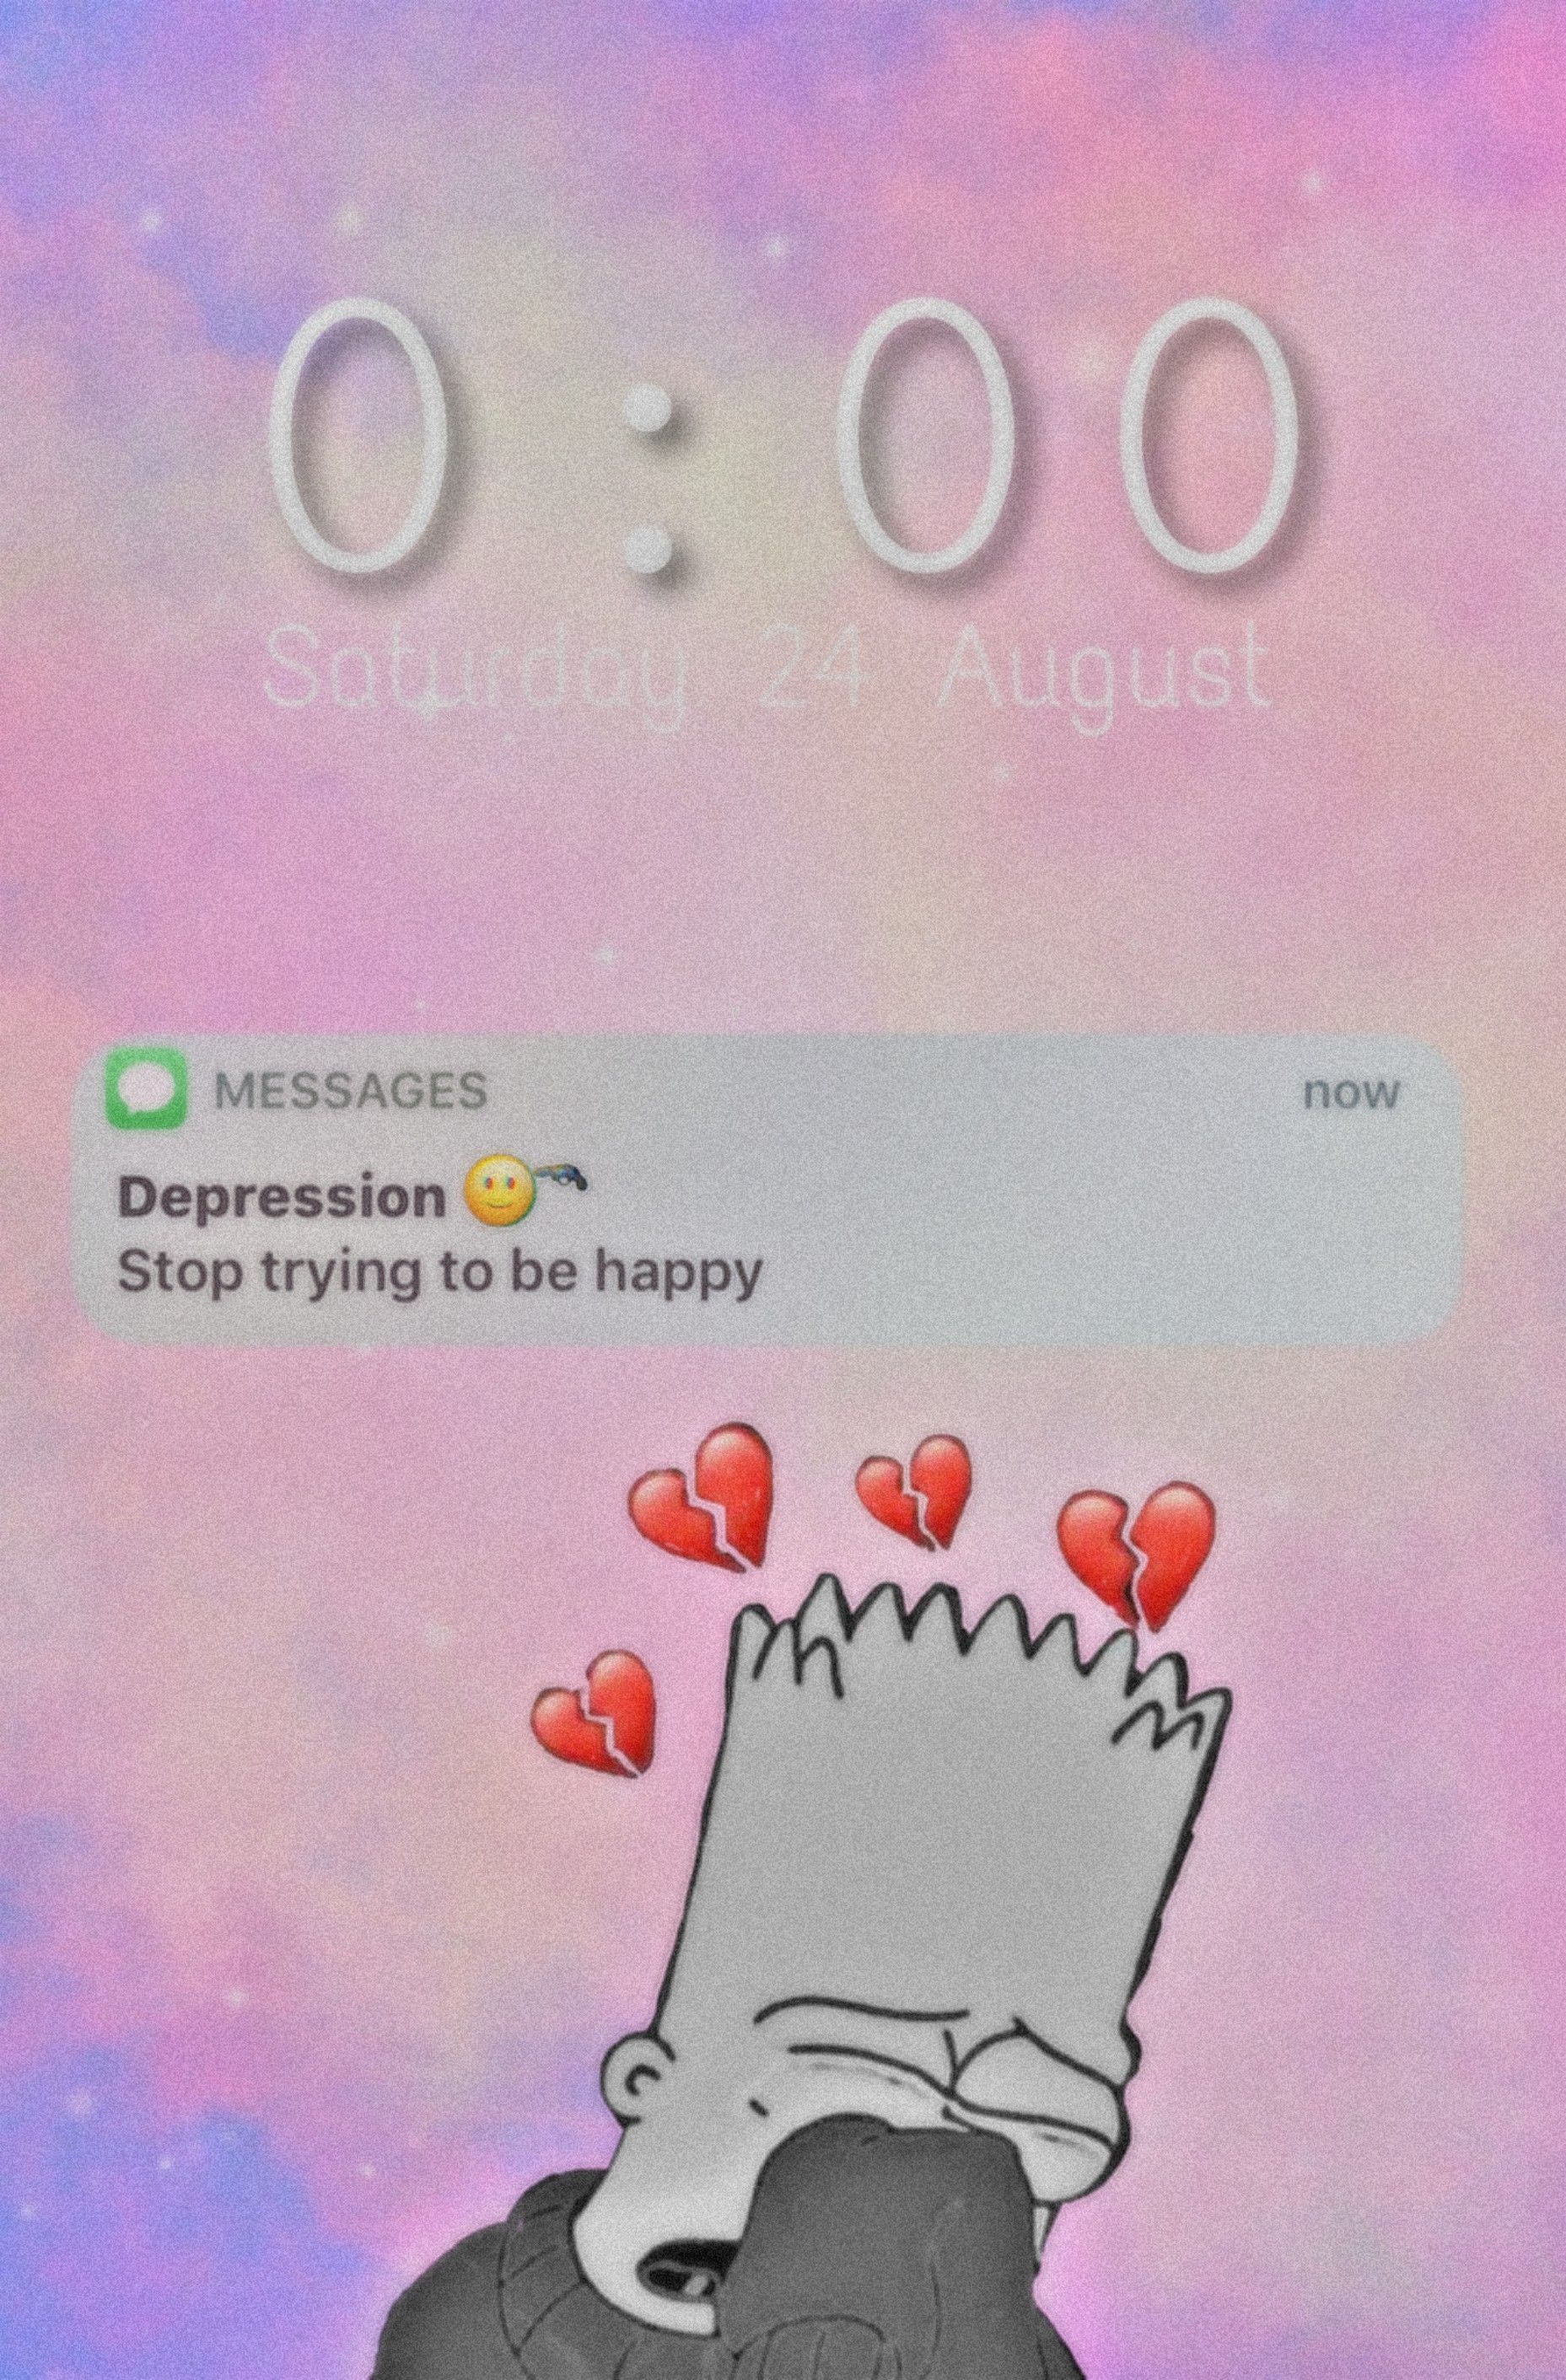 depression bart Image by